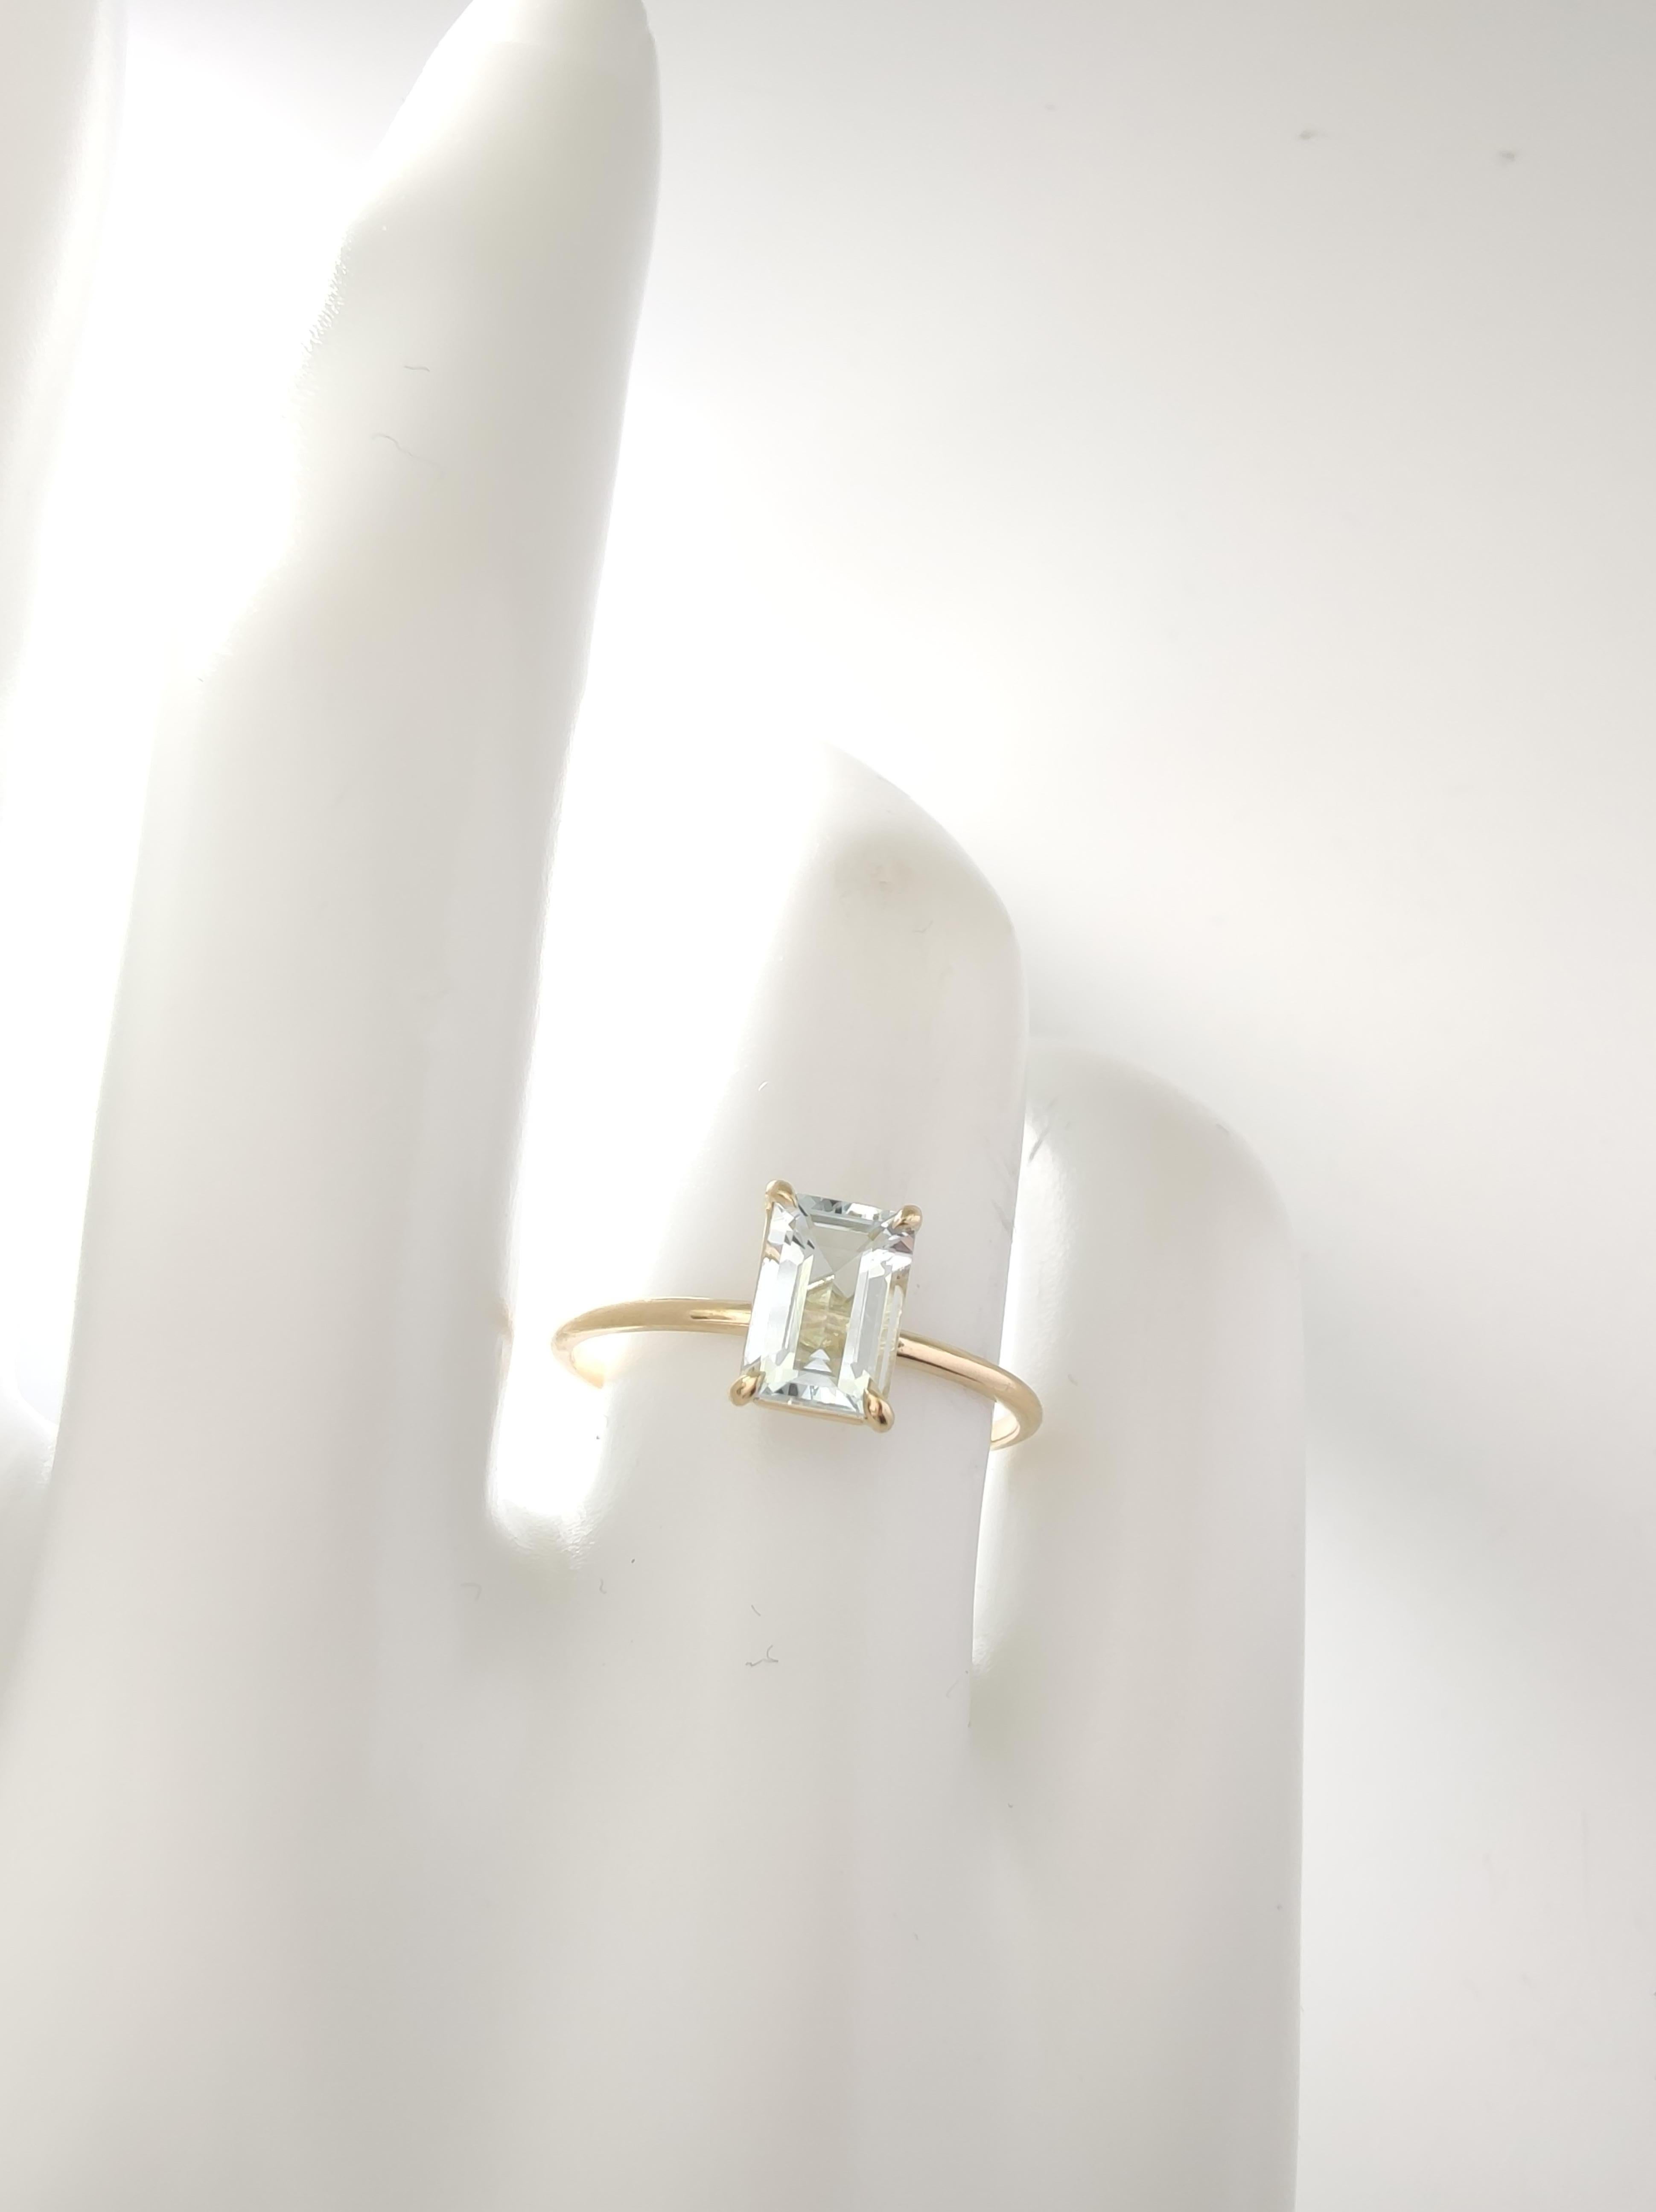 Captivating 18K Gold Solitaire Ring featuring a 0.83 Ct. Emerald-Cut Aquamarine For Sale 8